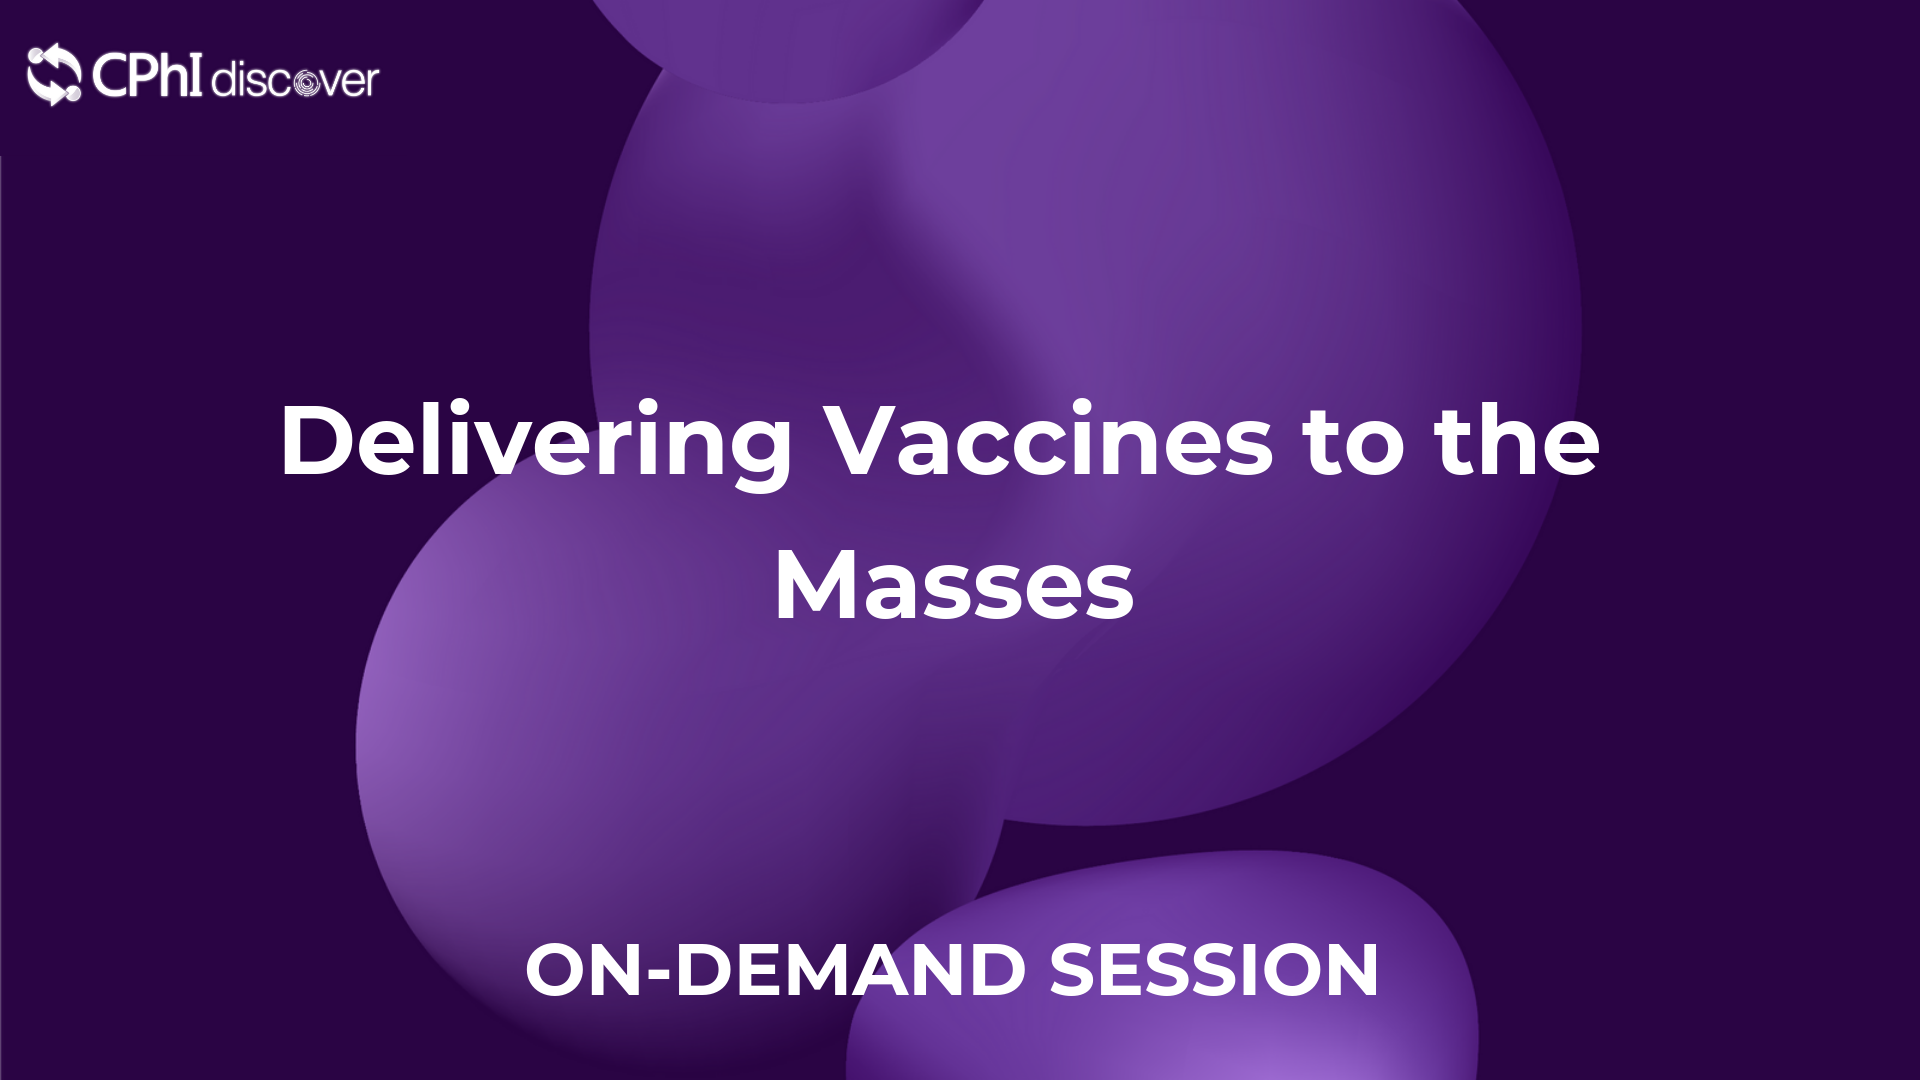 COVID-19: Delivering Vaccines to the Masses